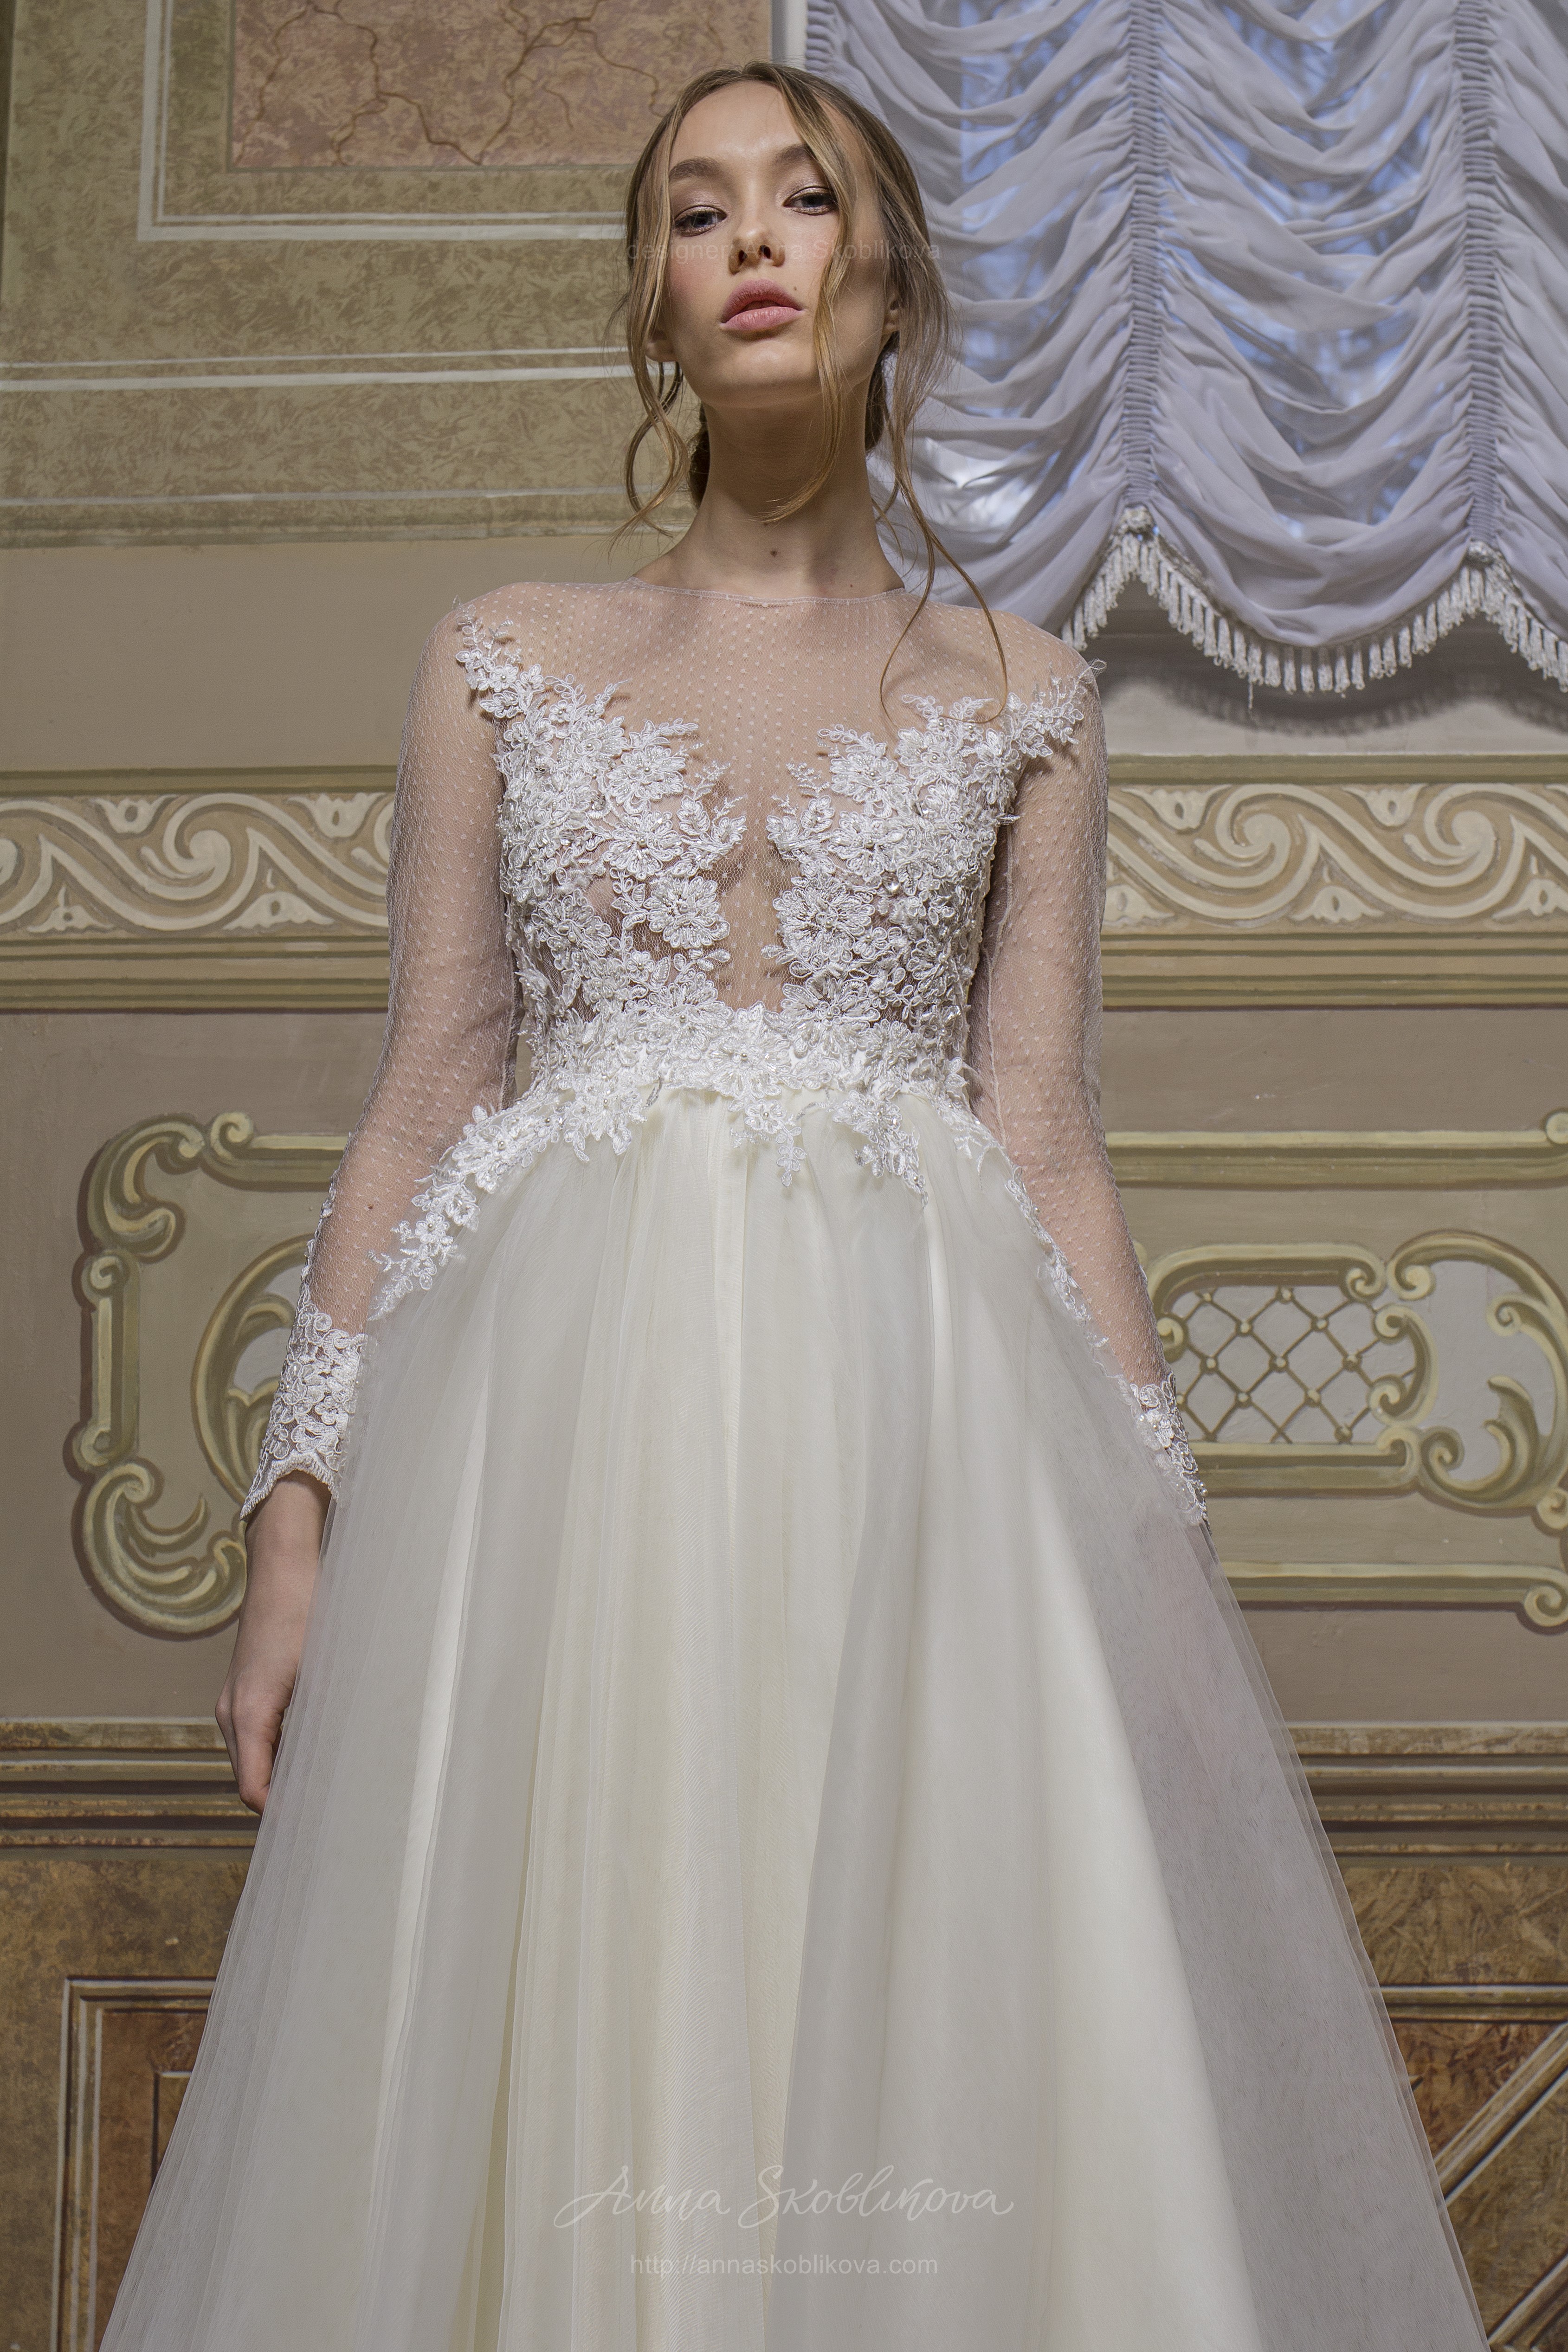 Angelina This Stunning Wedding Dress Features The Unique Haute Couture Hand Embroidery Anna Skoblikova